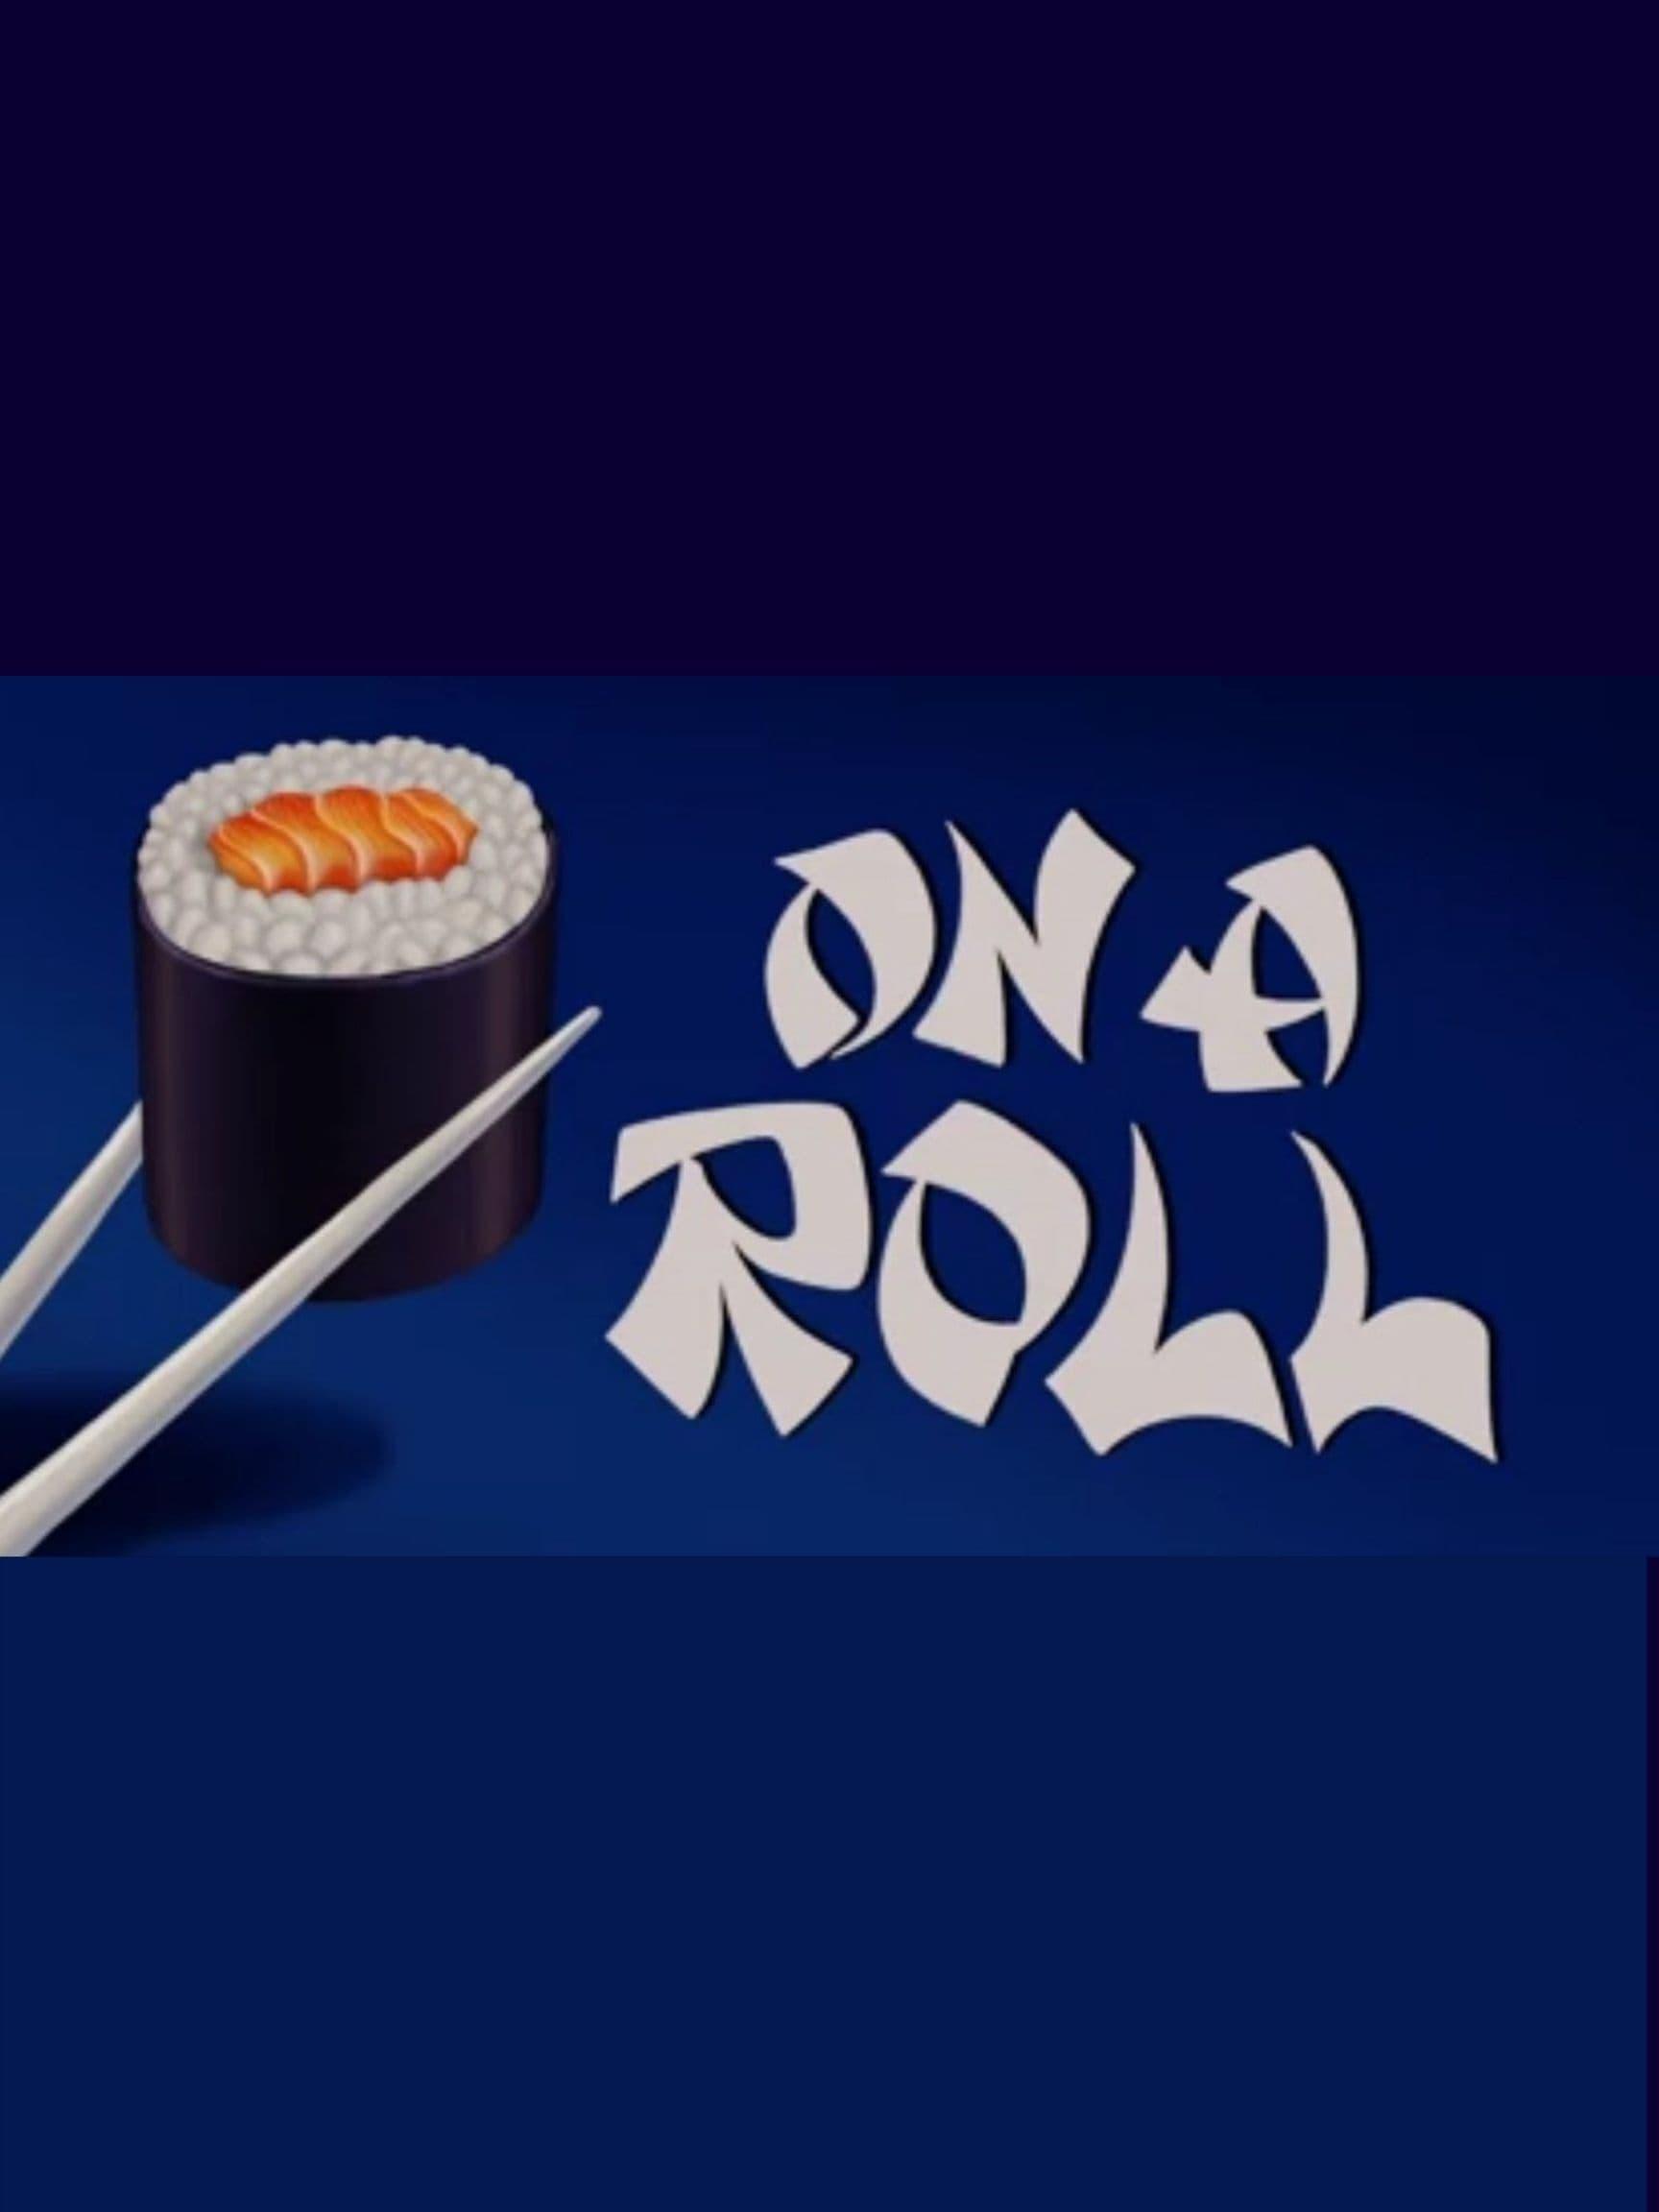 On a Roll poster